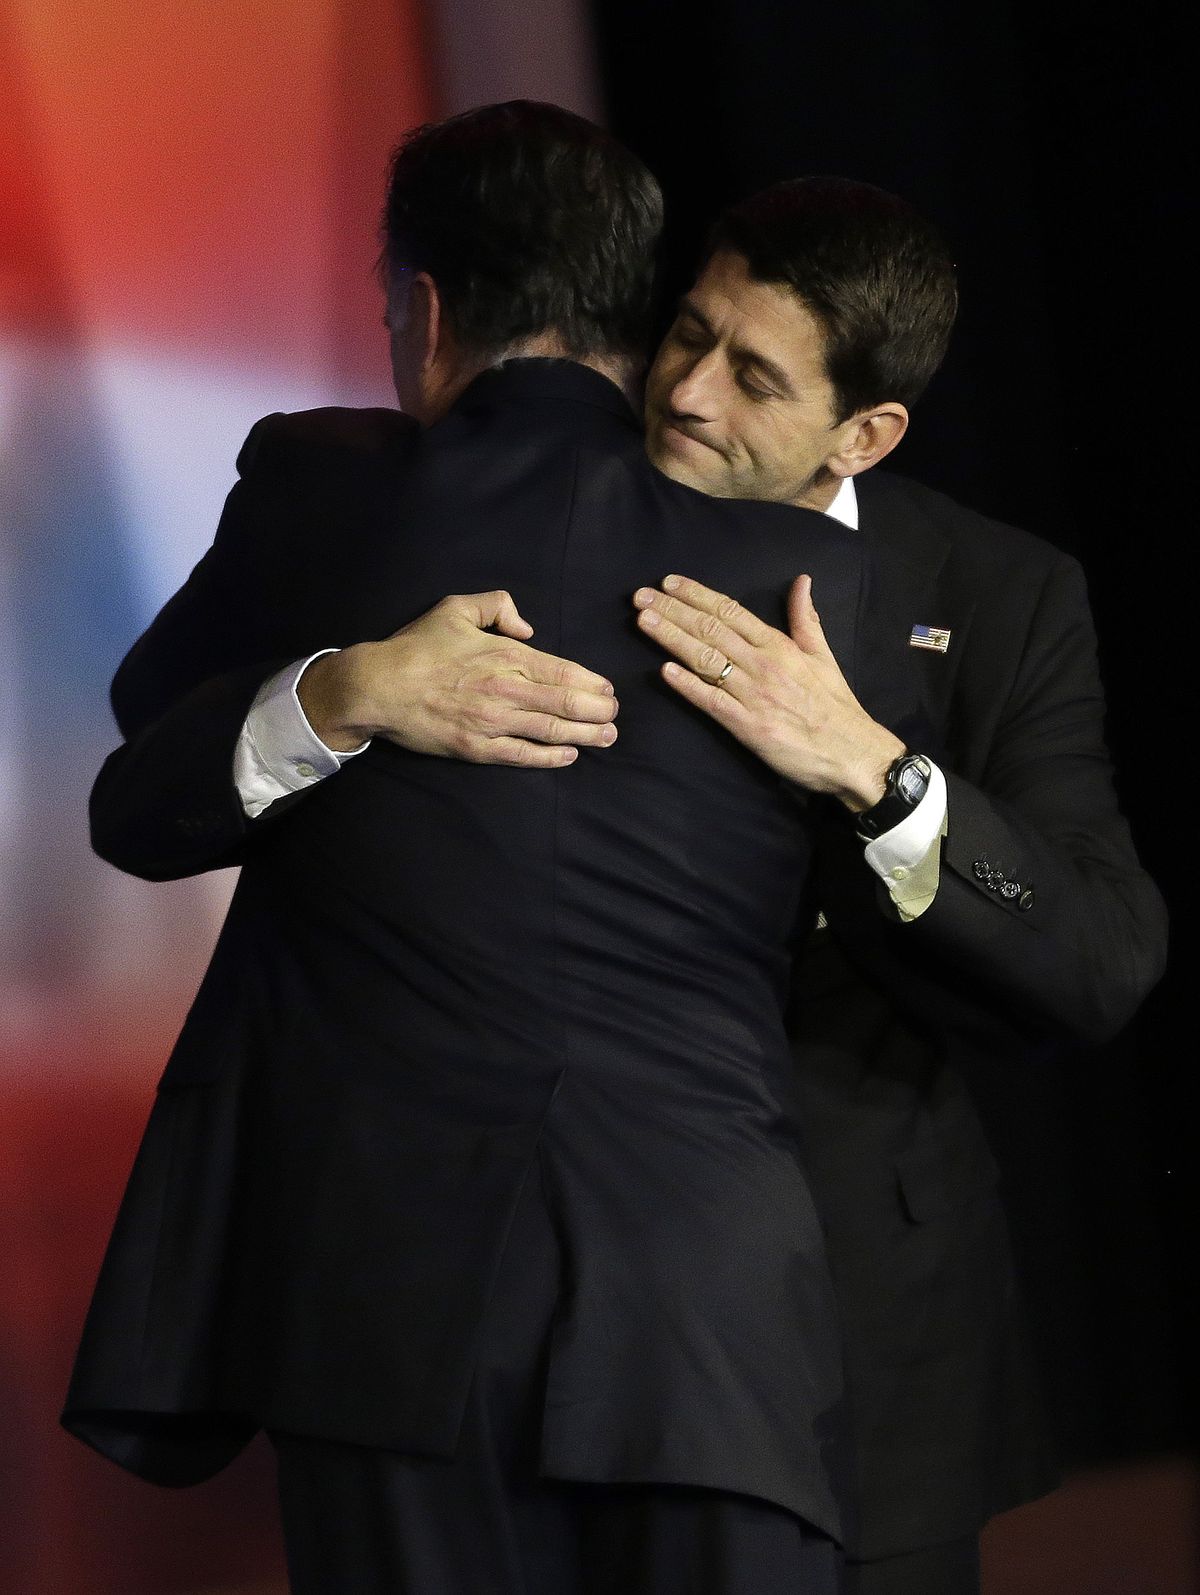 Republican presidential candidate and former Massachusetts Gov. Mitt Romney embraces Republican vice presidential candidate, Rep. Paul Ryan, R-Wis., after Romney conceded the race during his election night rally, Wednesday, Nov. 7, 2012, in Boston. (David Goldman / Associated Press)